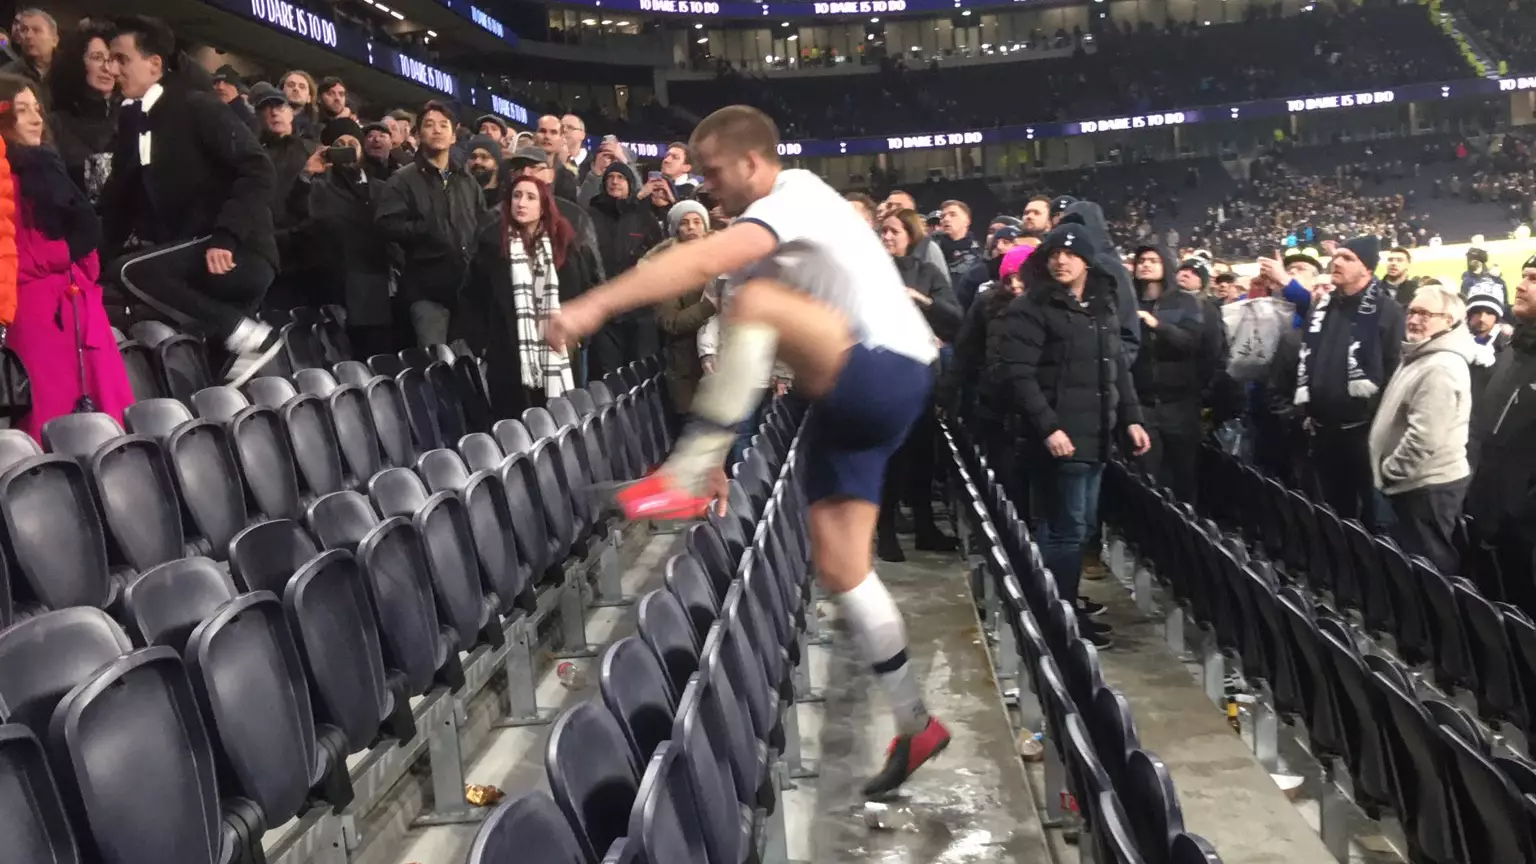 Spurs And England Star Eric Dier Storms Into Crowd To Confront Fans During Cup Tie